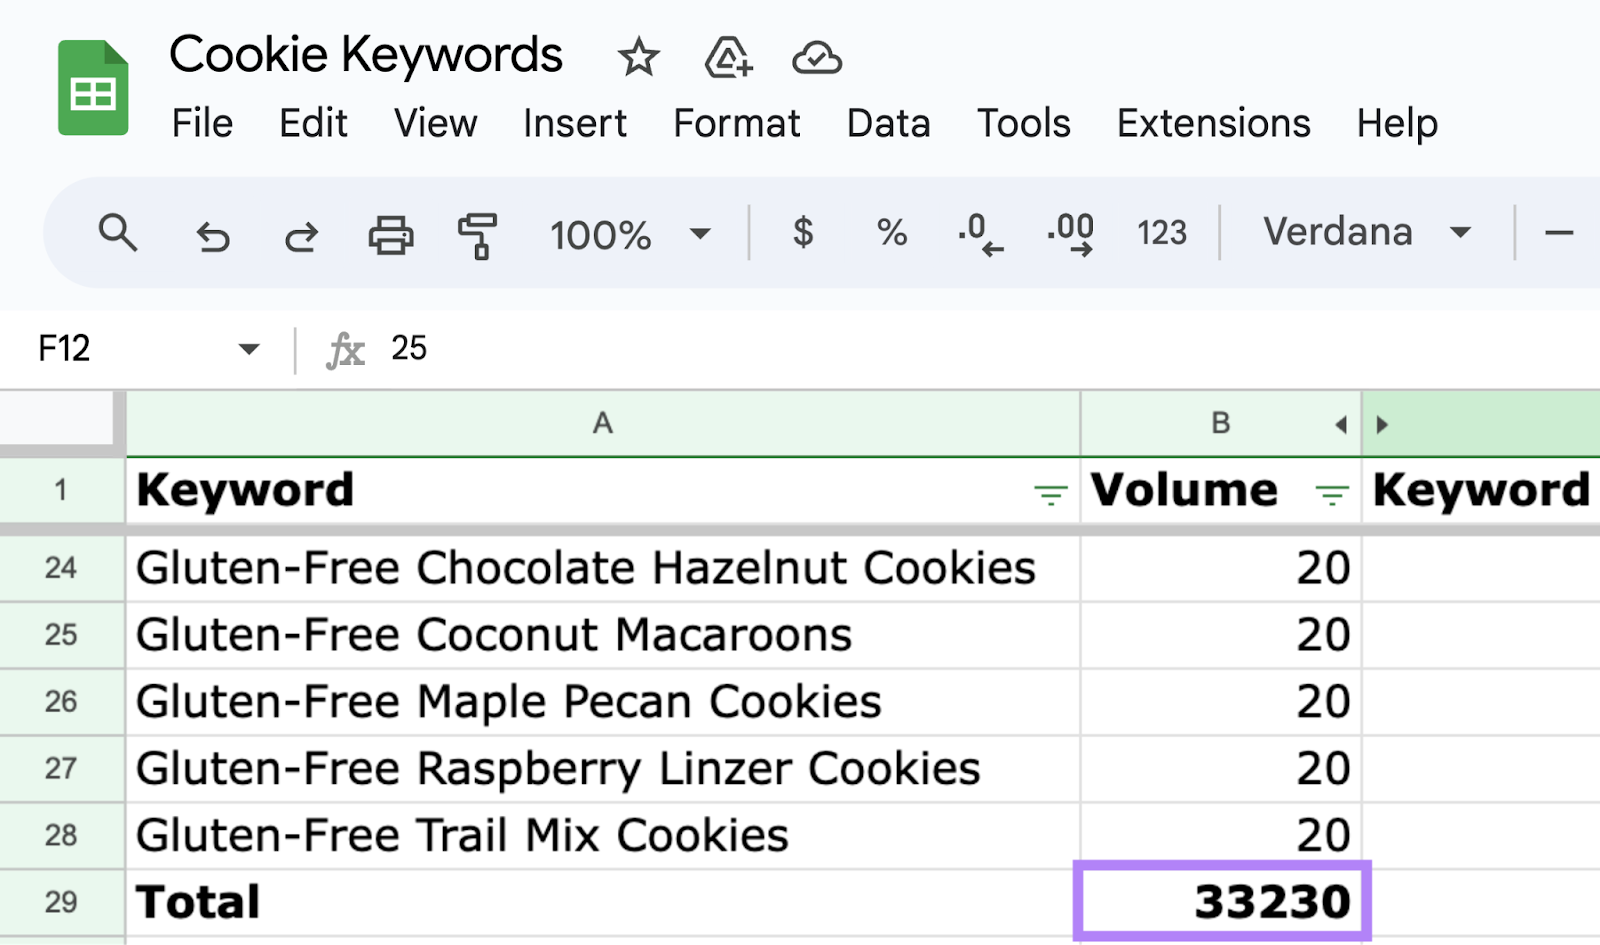 Total measurement   of the keywords successful  the spreadsheet from supra  shows 33,230